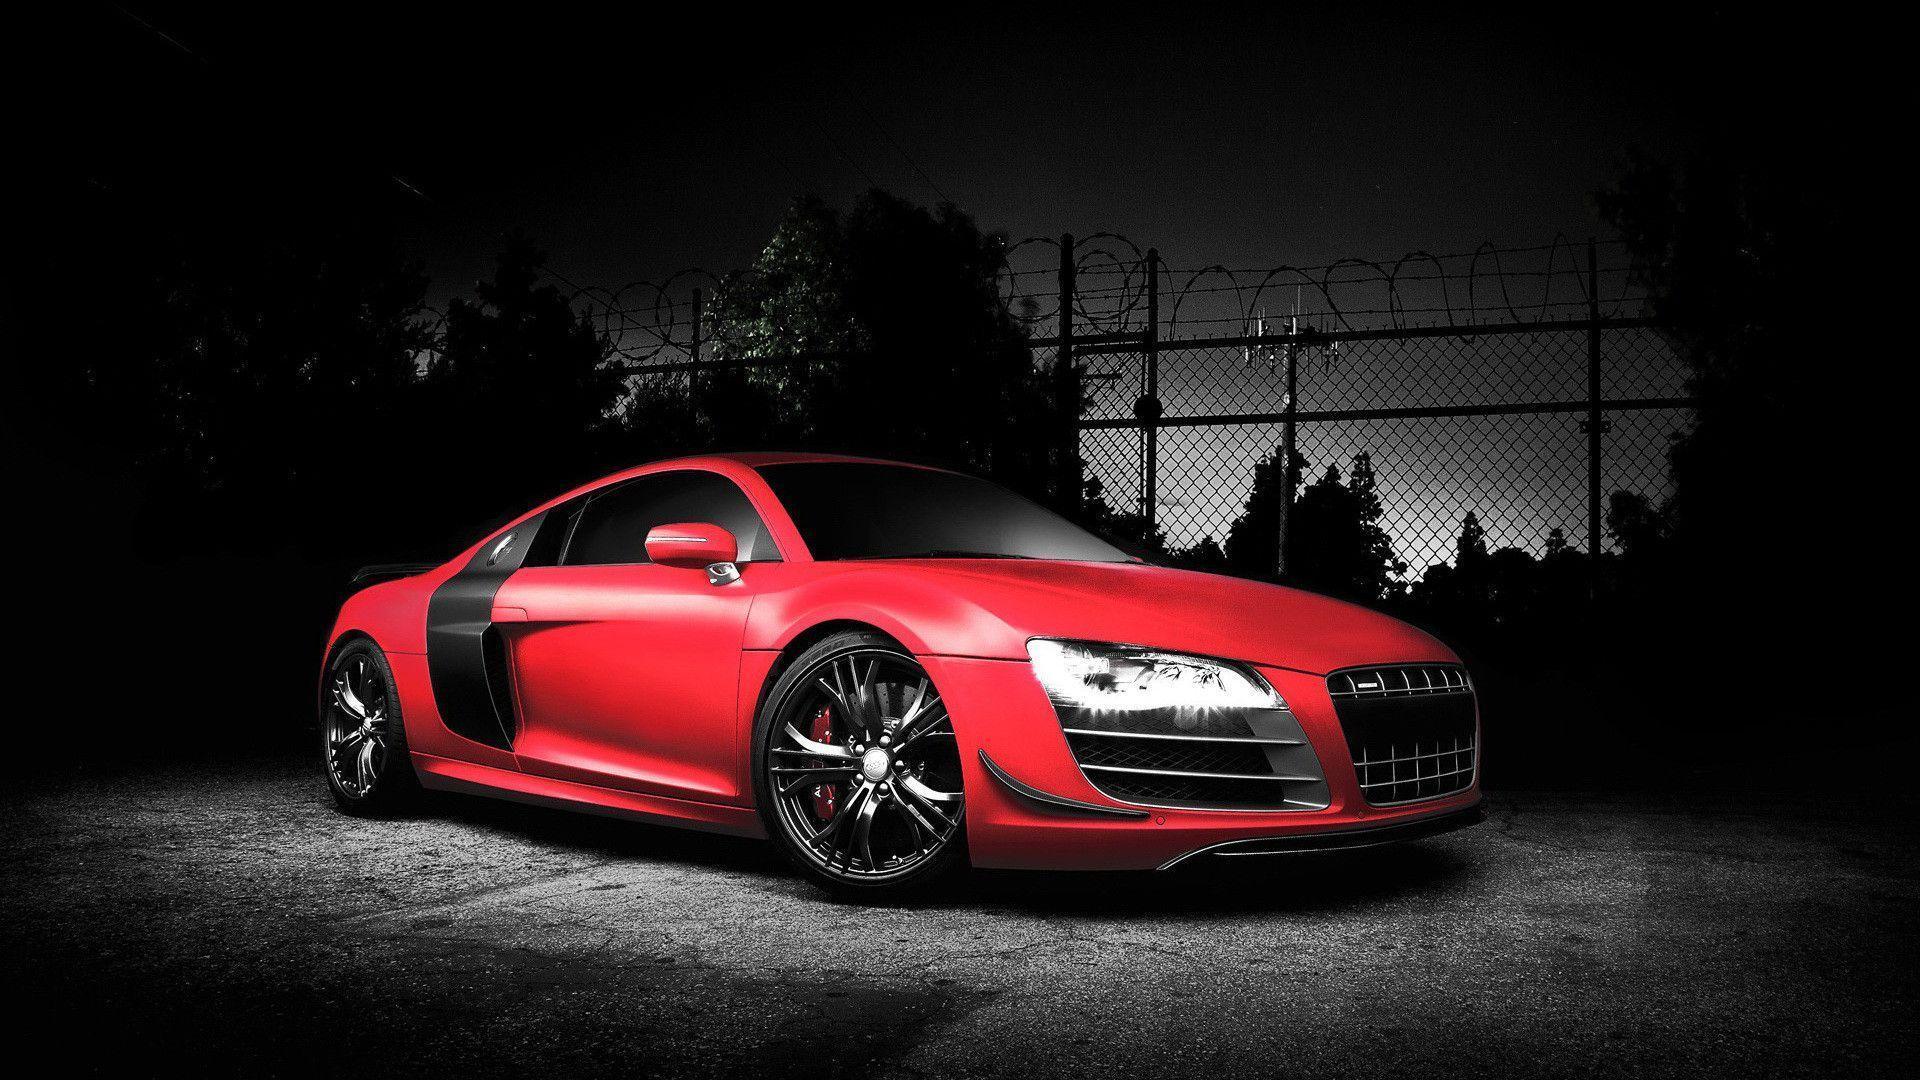 Audi car wallpaper red tuning sports wallpaper archives. Auto